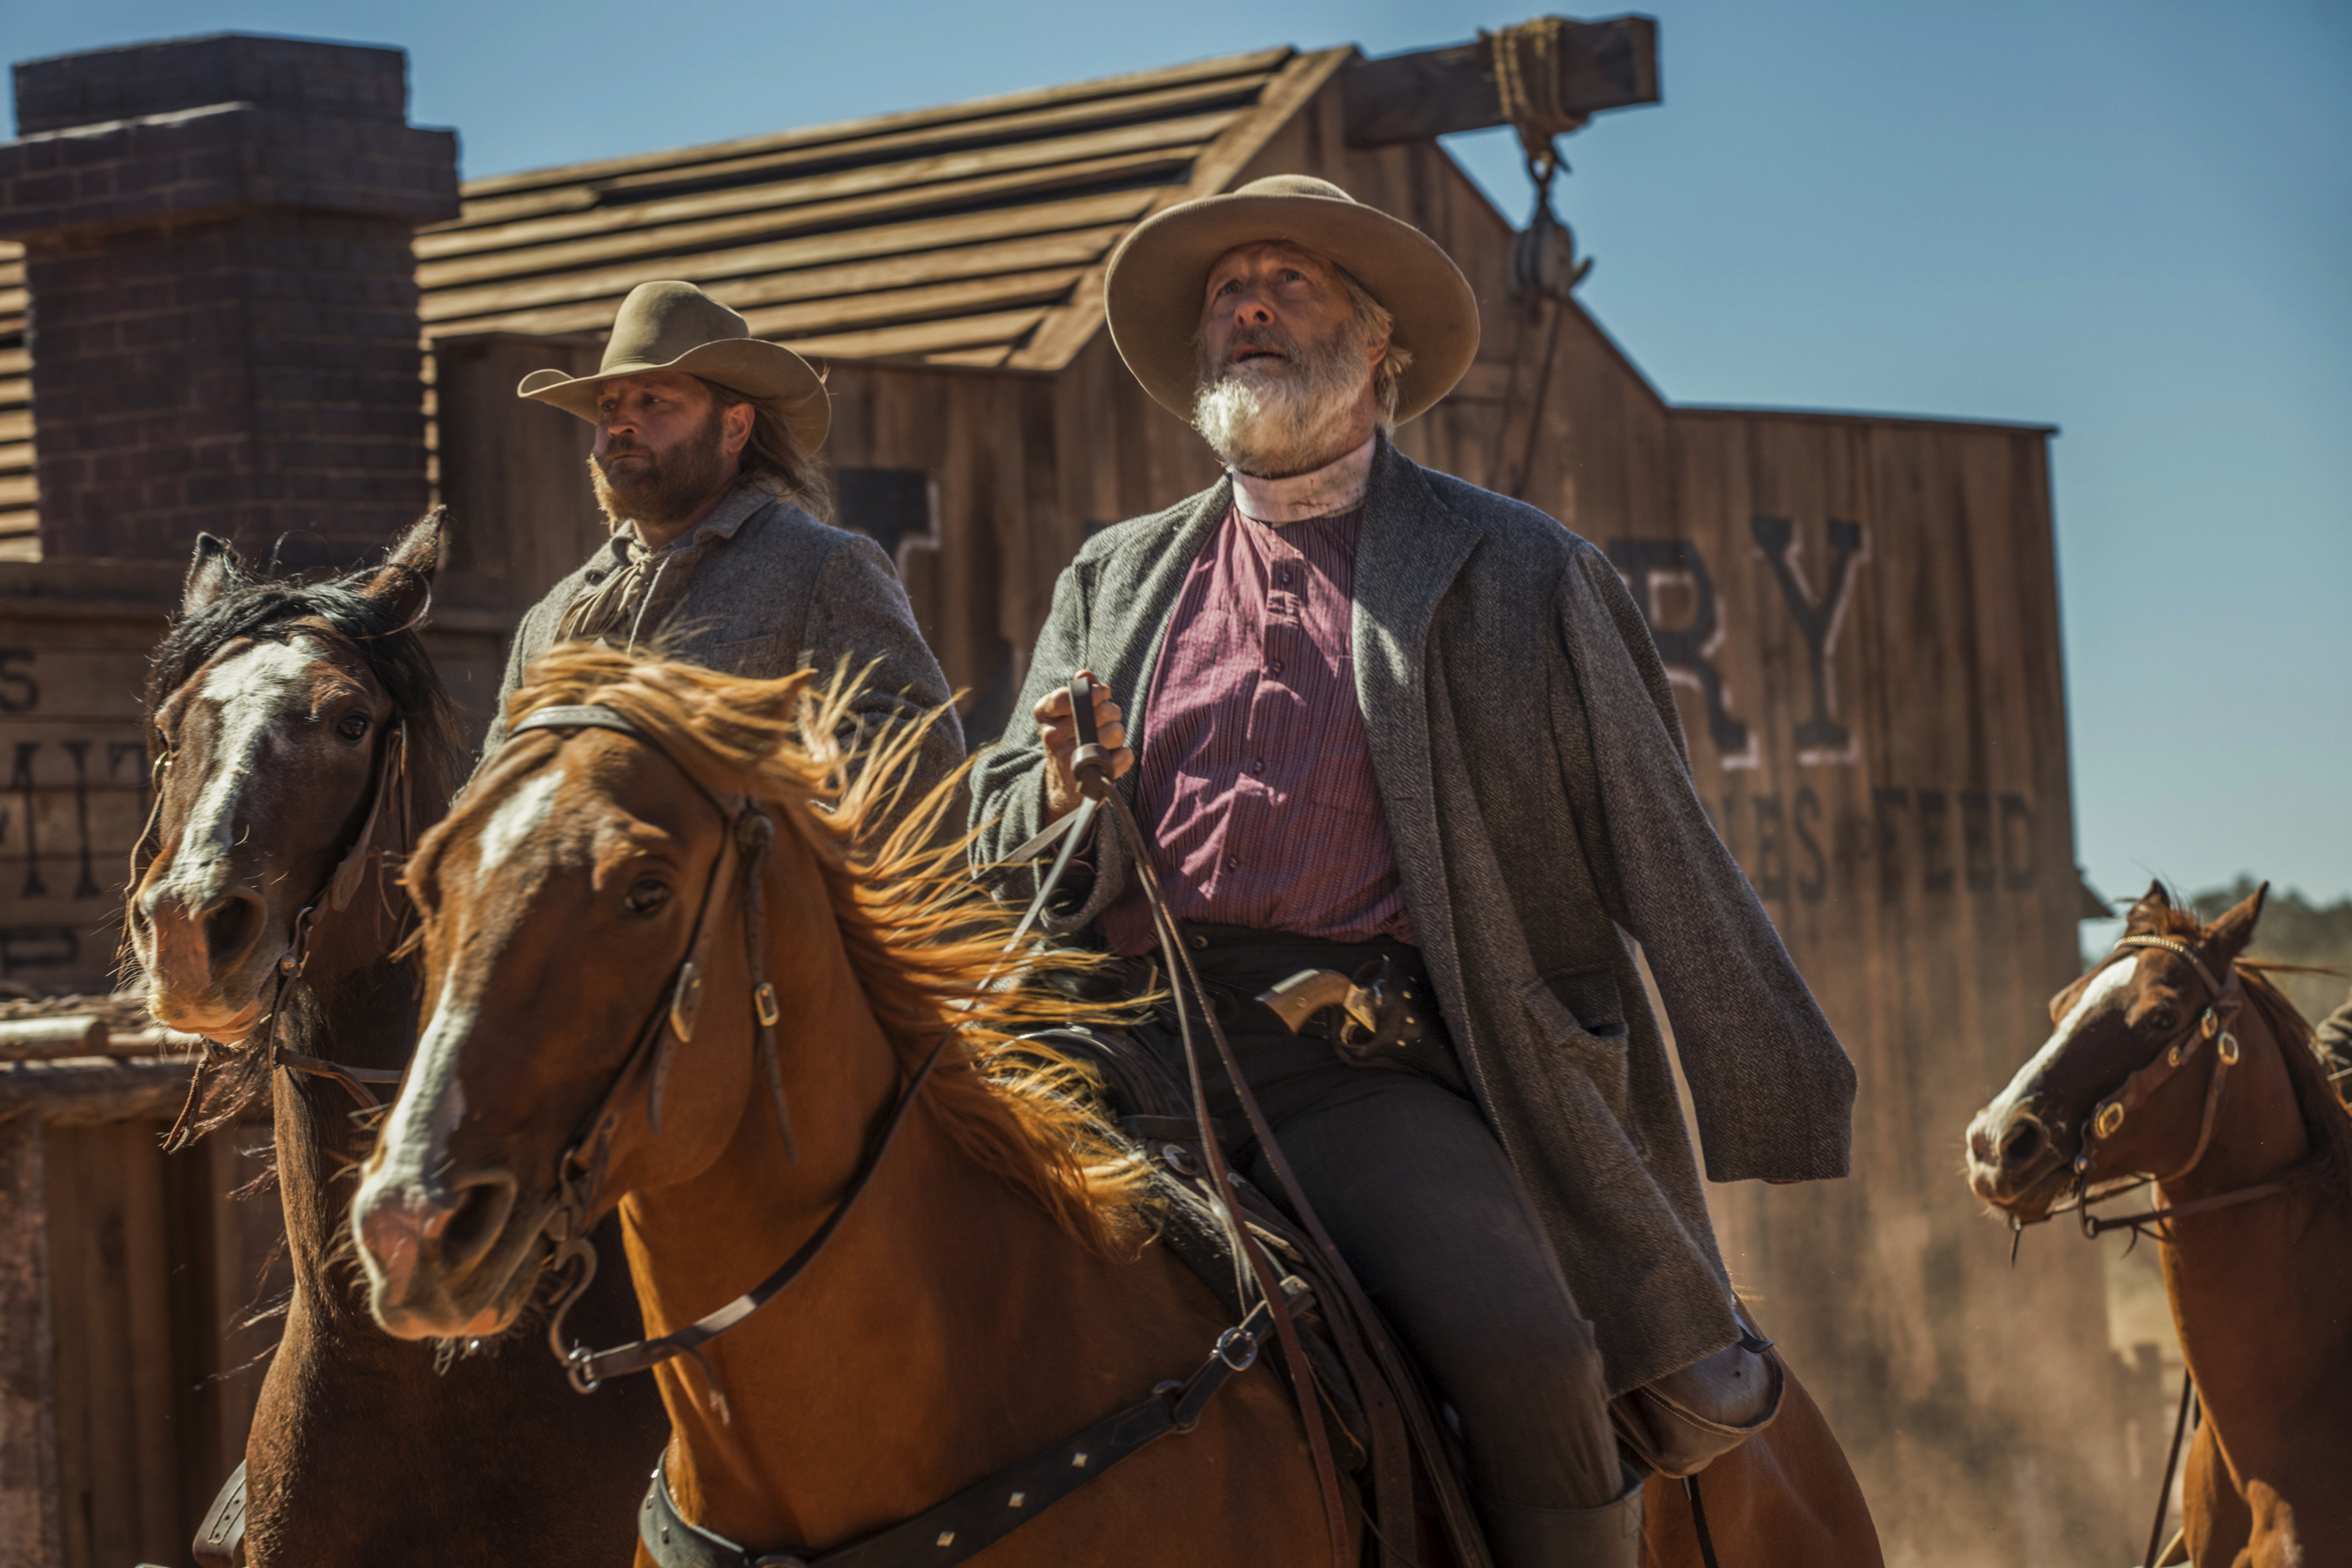 Jeff Daniels rides on horseback, with a revolver at his side, in Netflix’s Godless